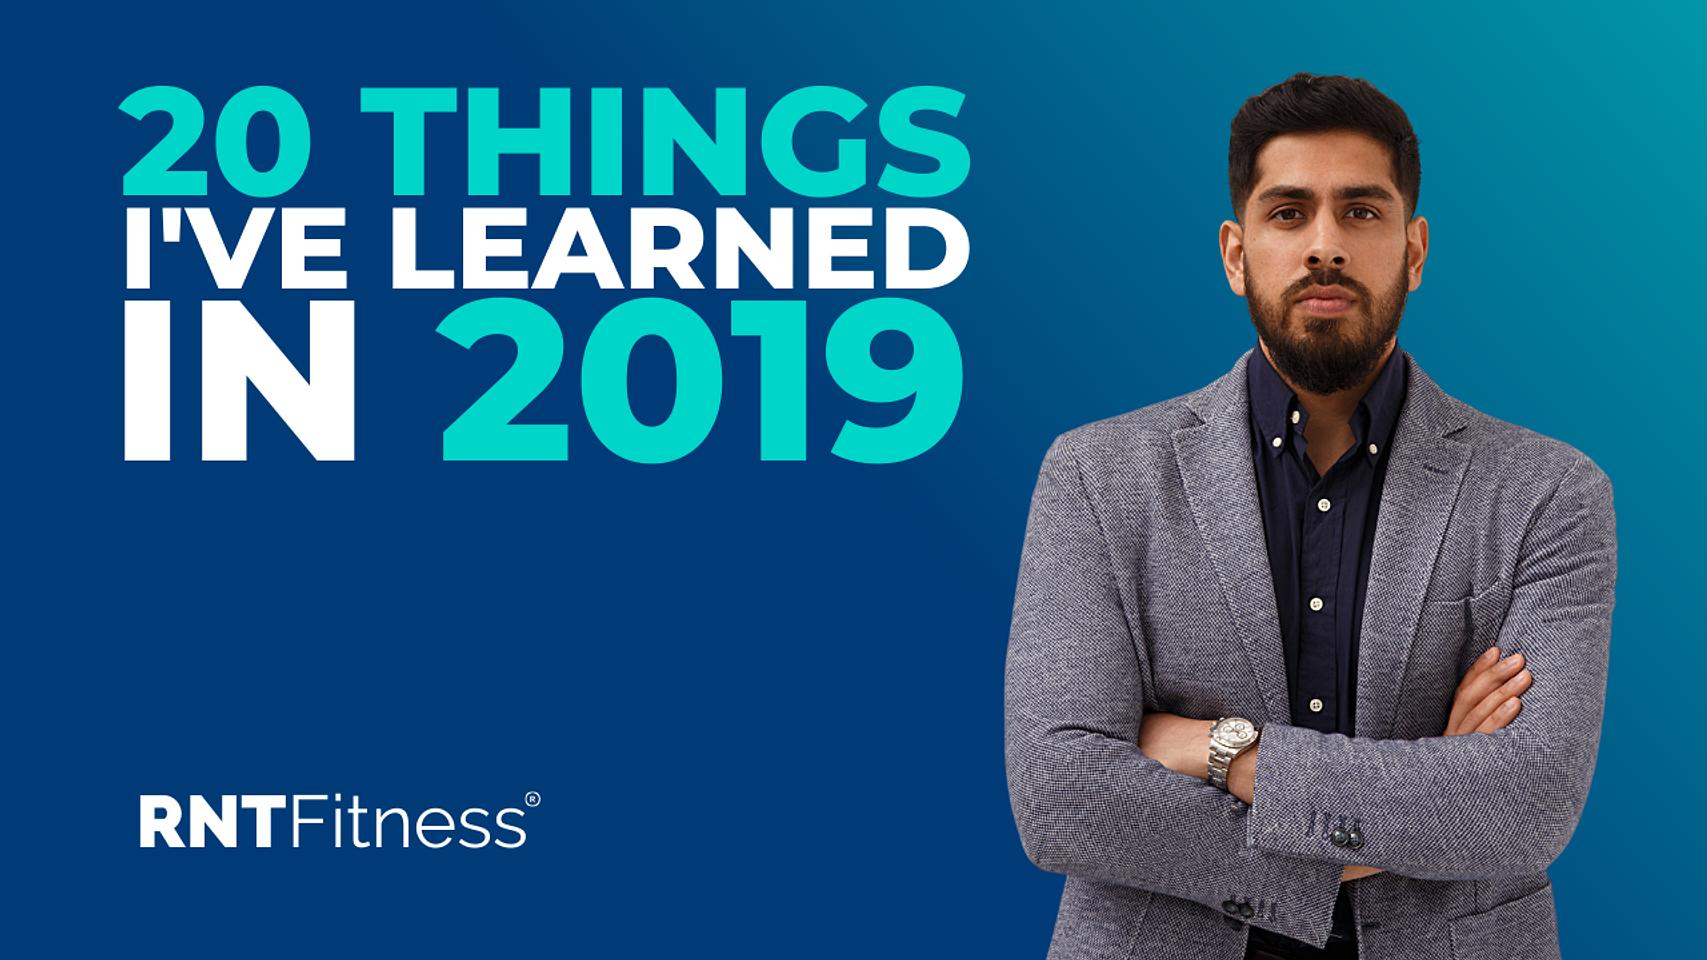 Top 20 Things I've Learned In 2019